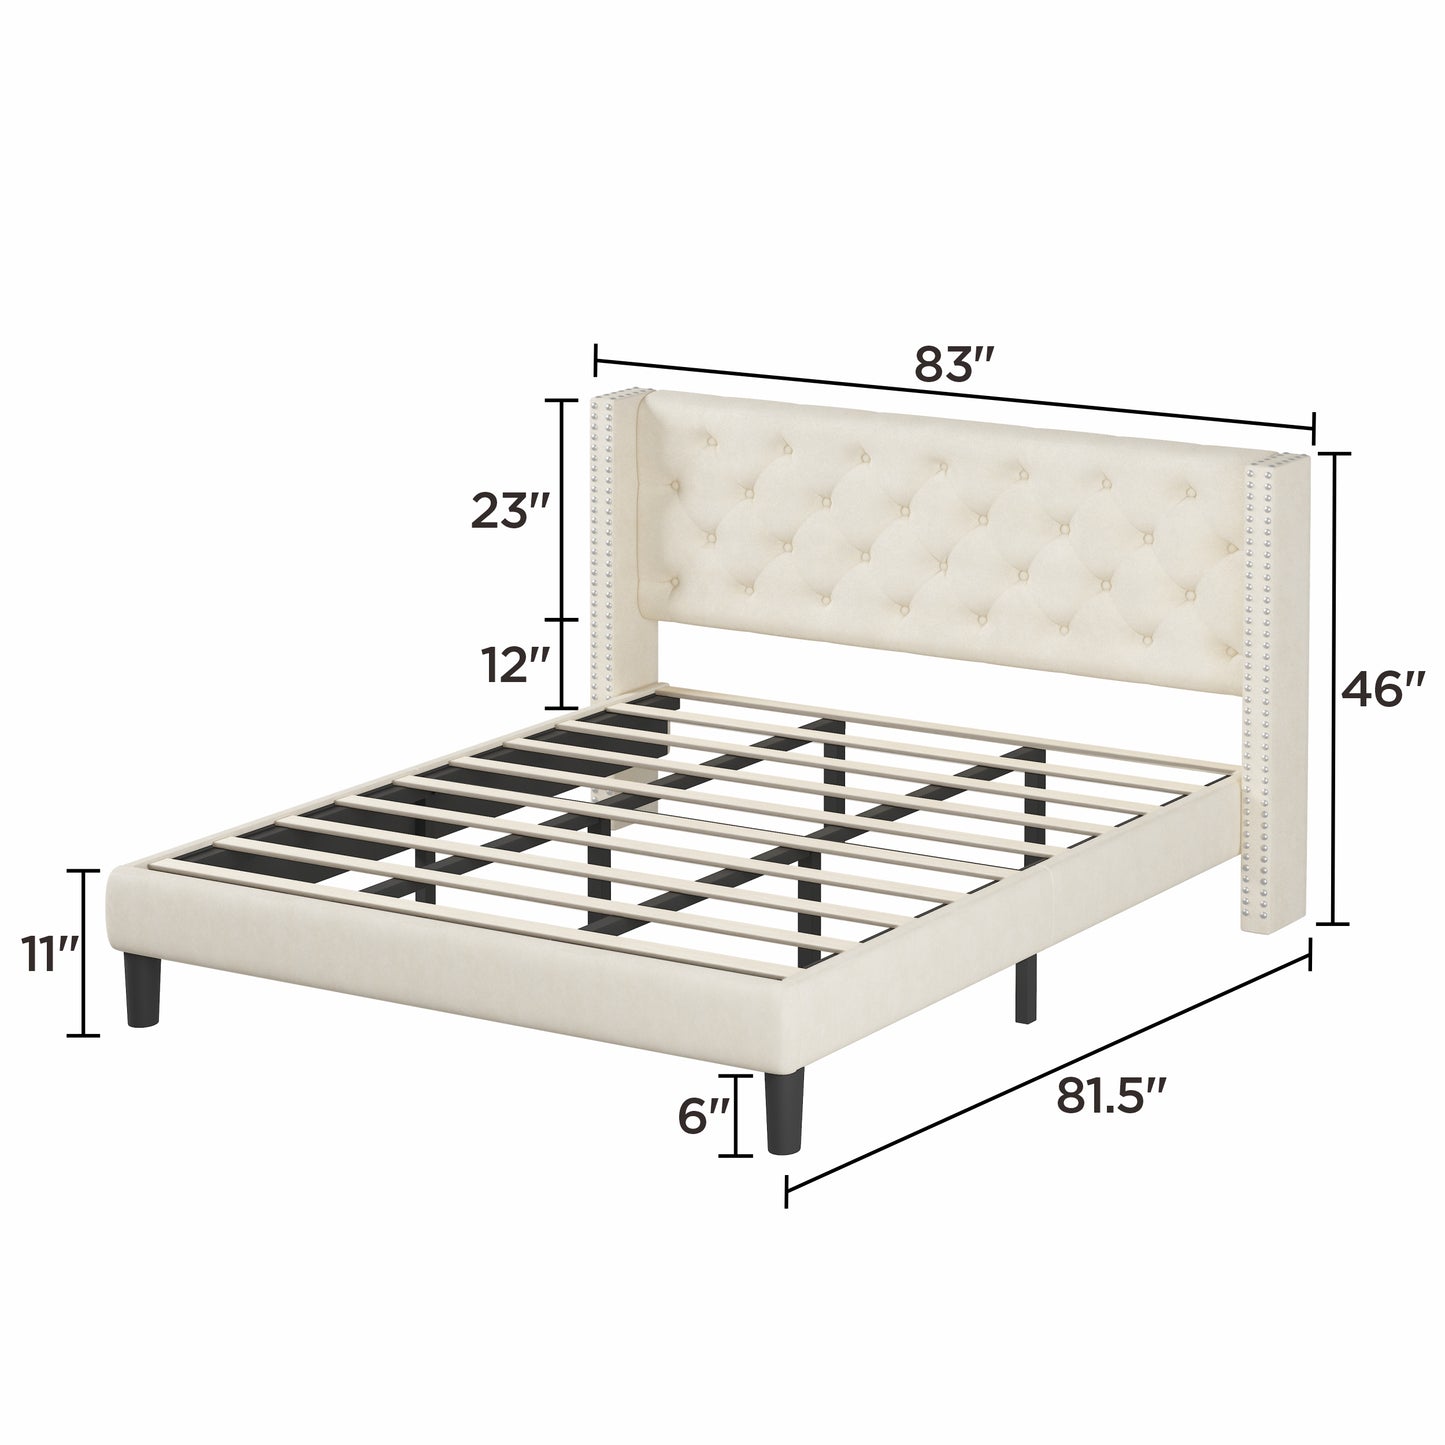 Molblly King Size Bed Frame with Upholstered Headboard, Strong Frame, and Wooden Slats Support, Non-Slip, and Noise-Free, No Box Spring Needed, Easy Assembly, Beige